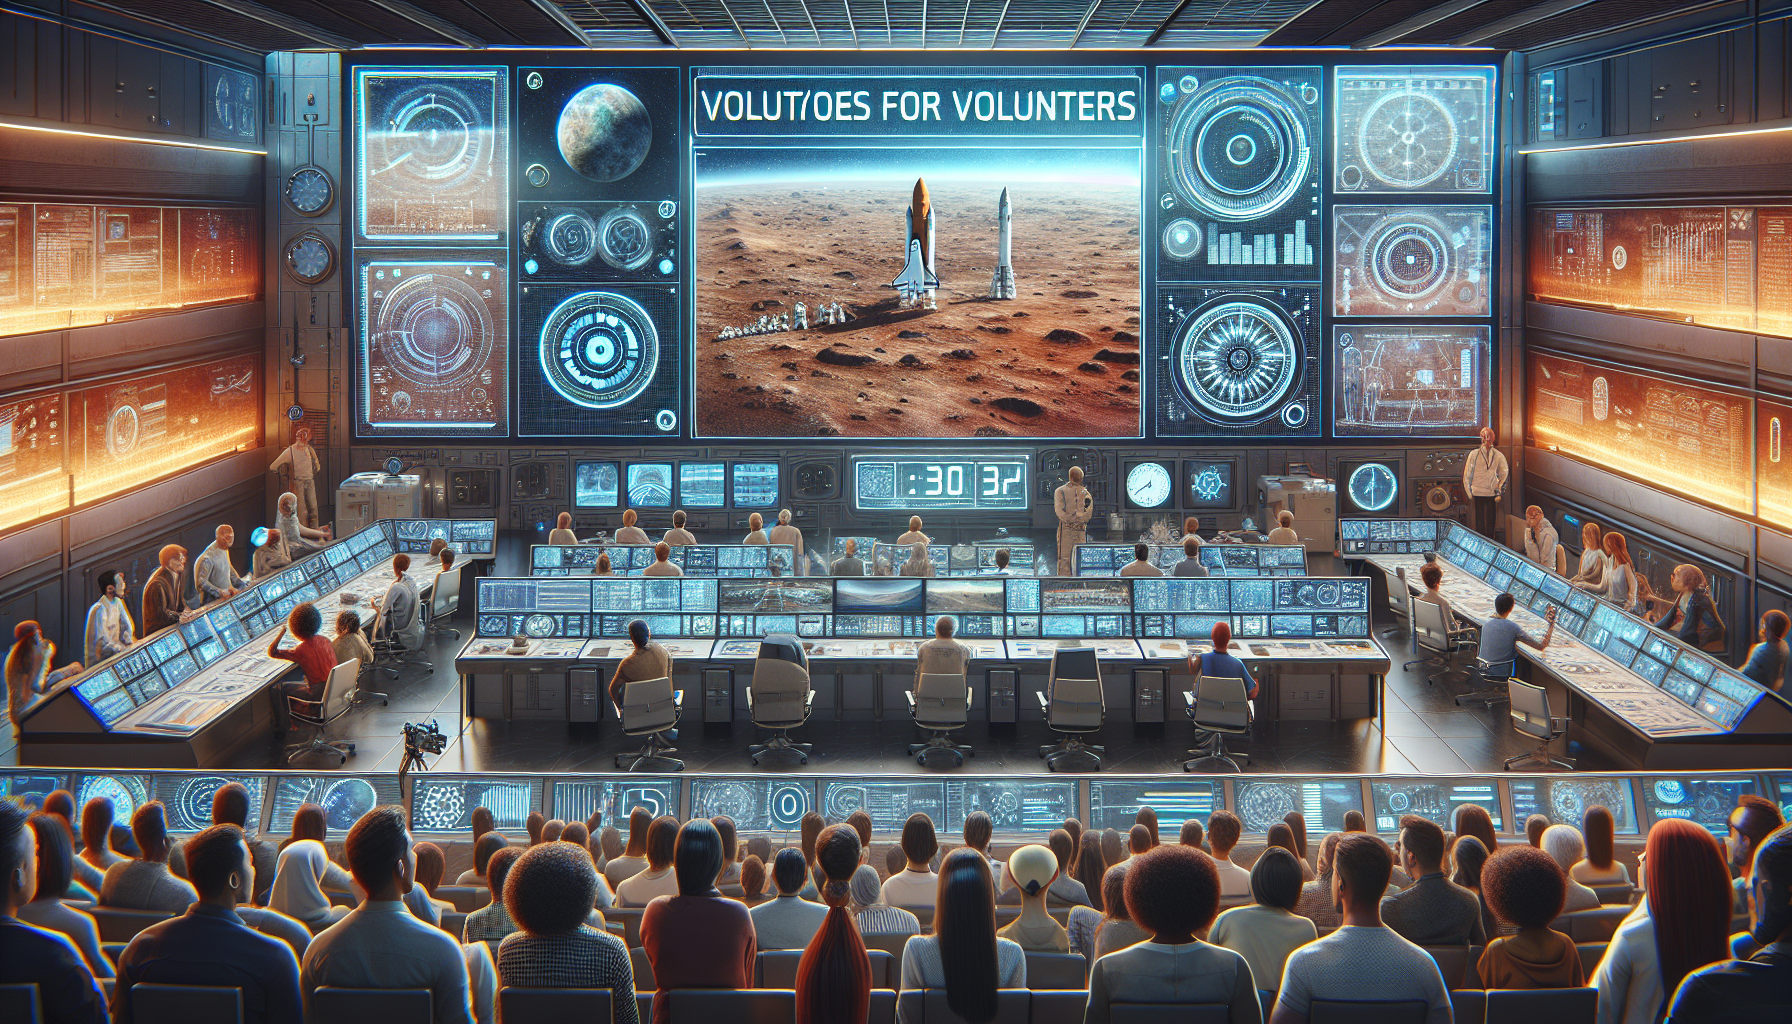 NASA is Looking for Volunteers to Participate in a Year-Long Mars Simulation Experiment.